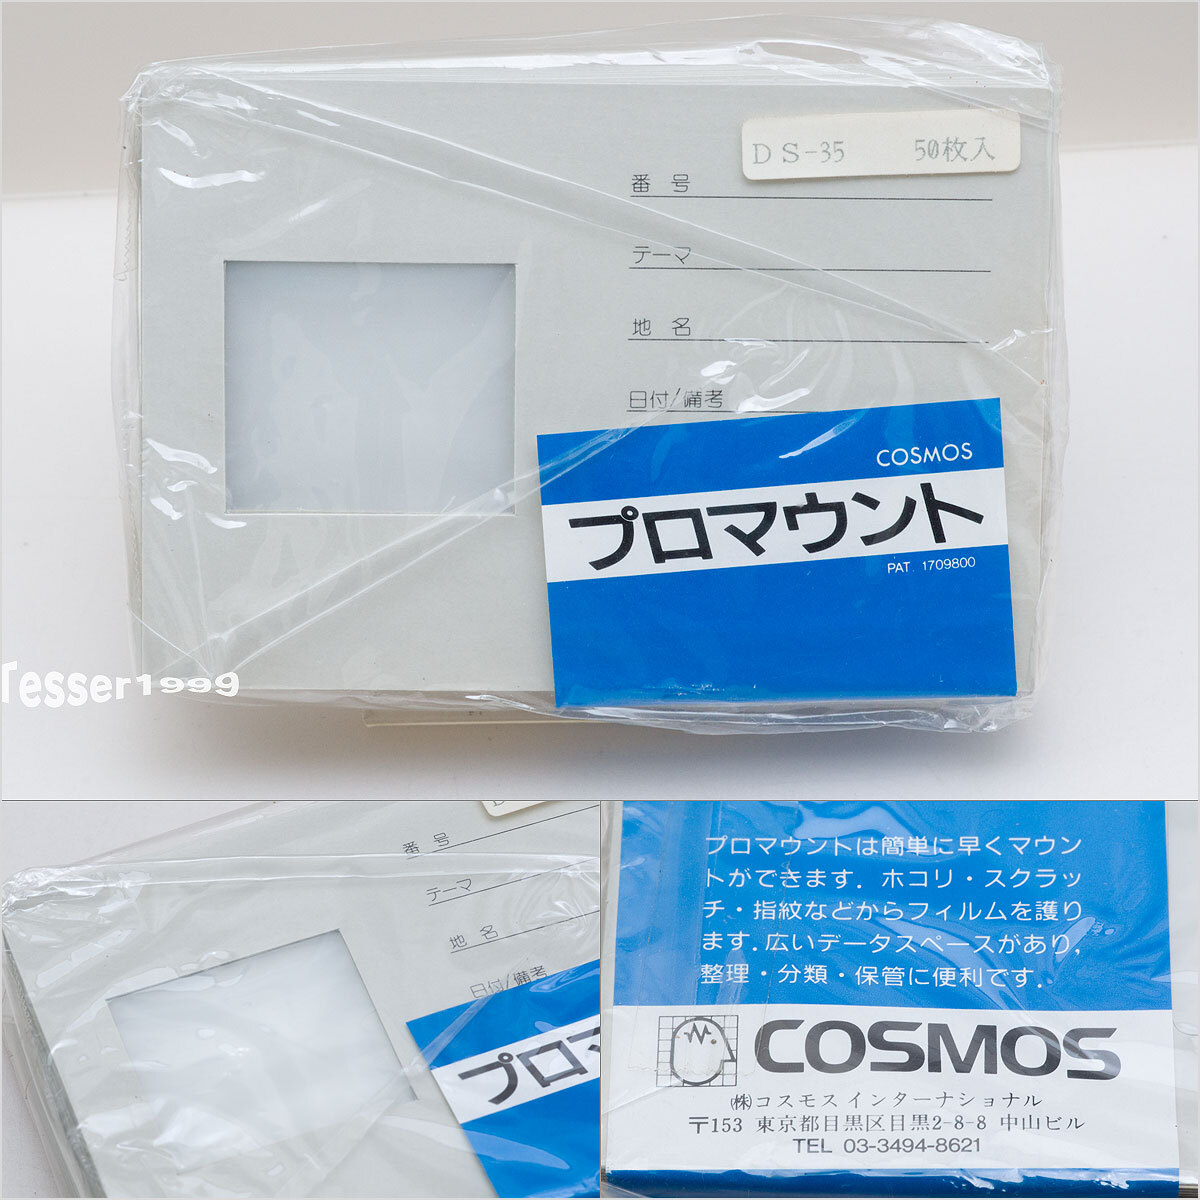 COSMOS Cosmos Pro mount 4X5 for (DS-45) 7 sheets *35 millimeter for (DS-35) 33 sheets archive . photo stock for [0501]